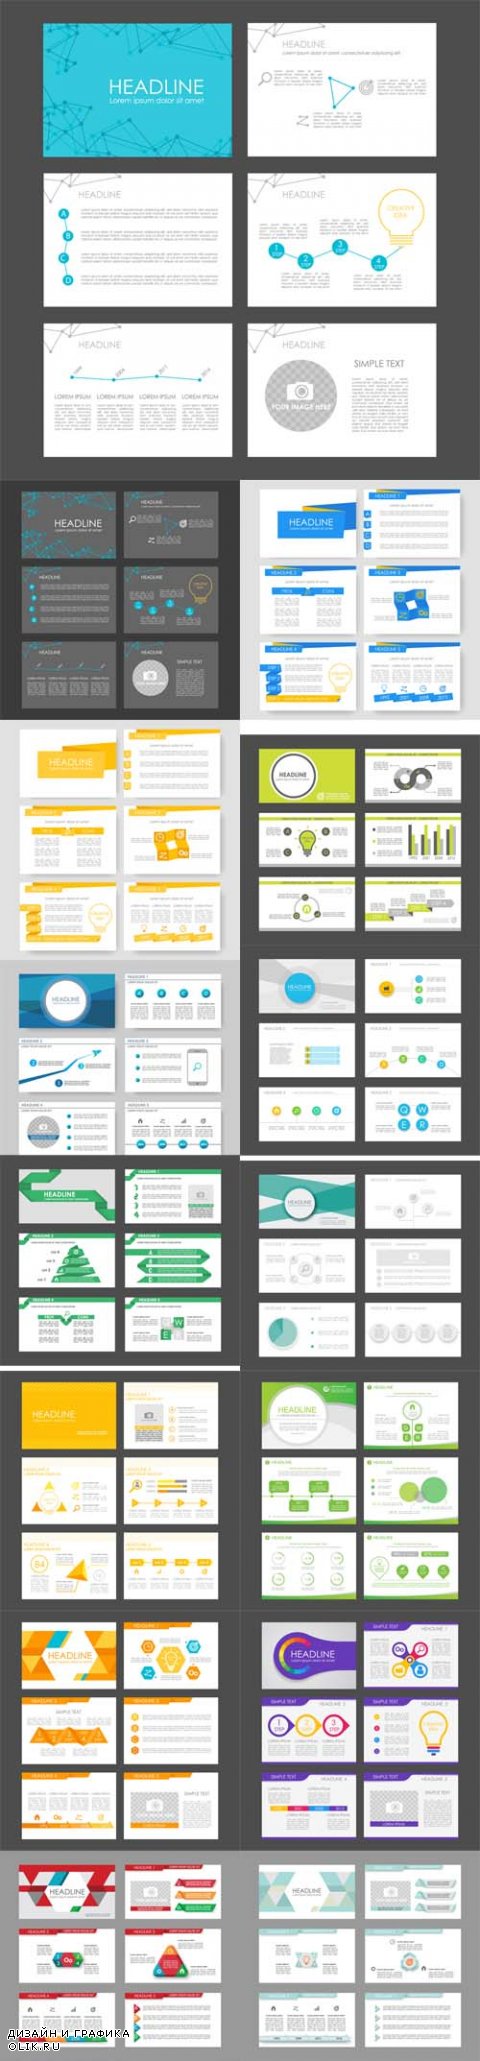 Vector Infographic Elements for Presentation Templates